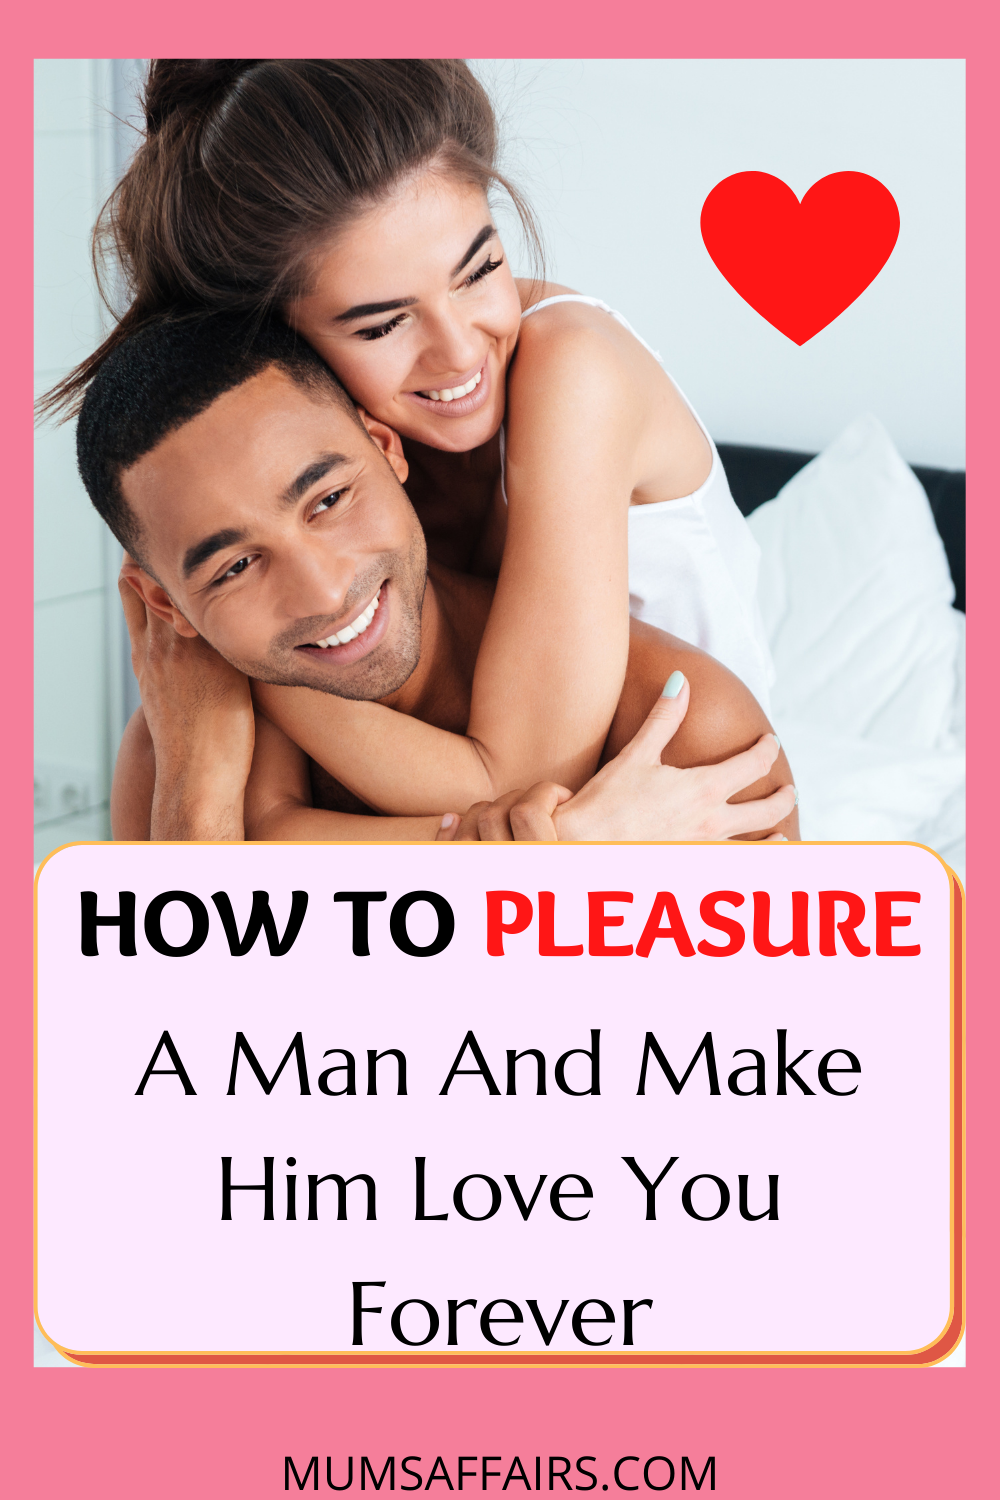 ways To Pleasure A Man And Make Him Love You Forever